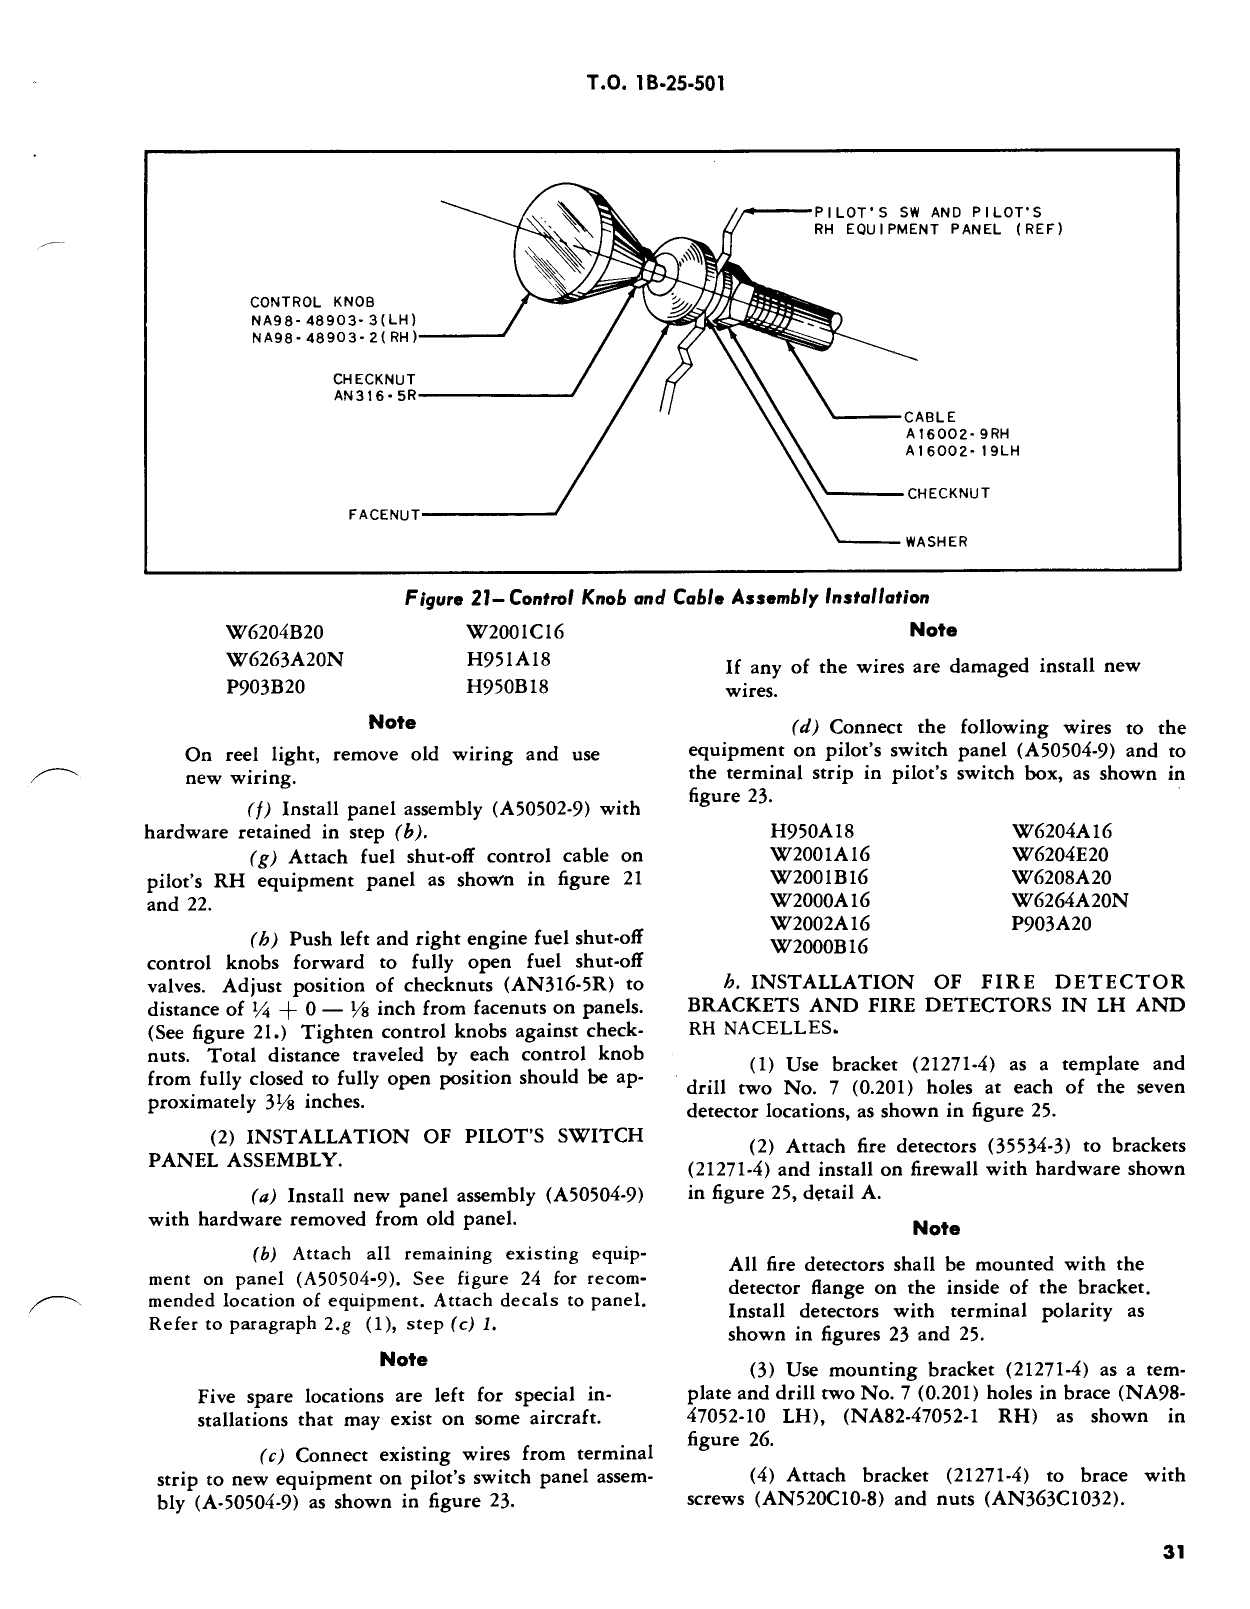 Sample page 382 from AirCorps Library document: Technical Orders - B-25 - Part 2